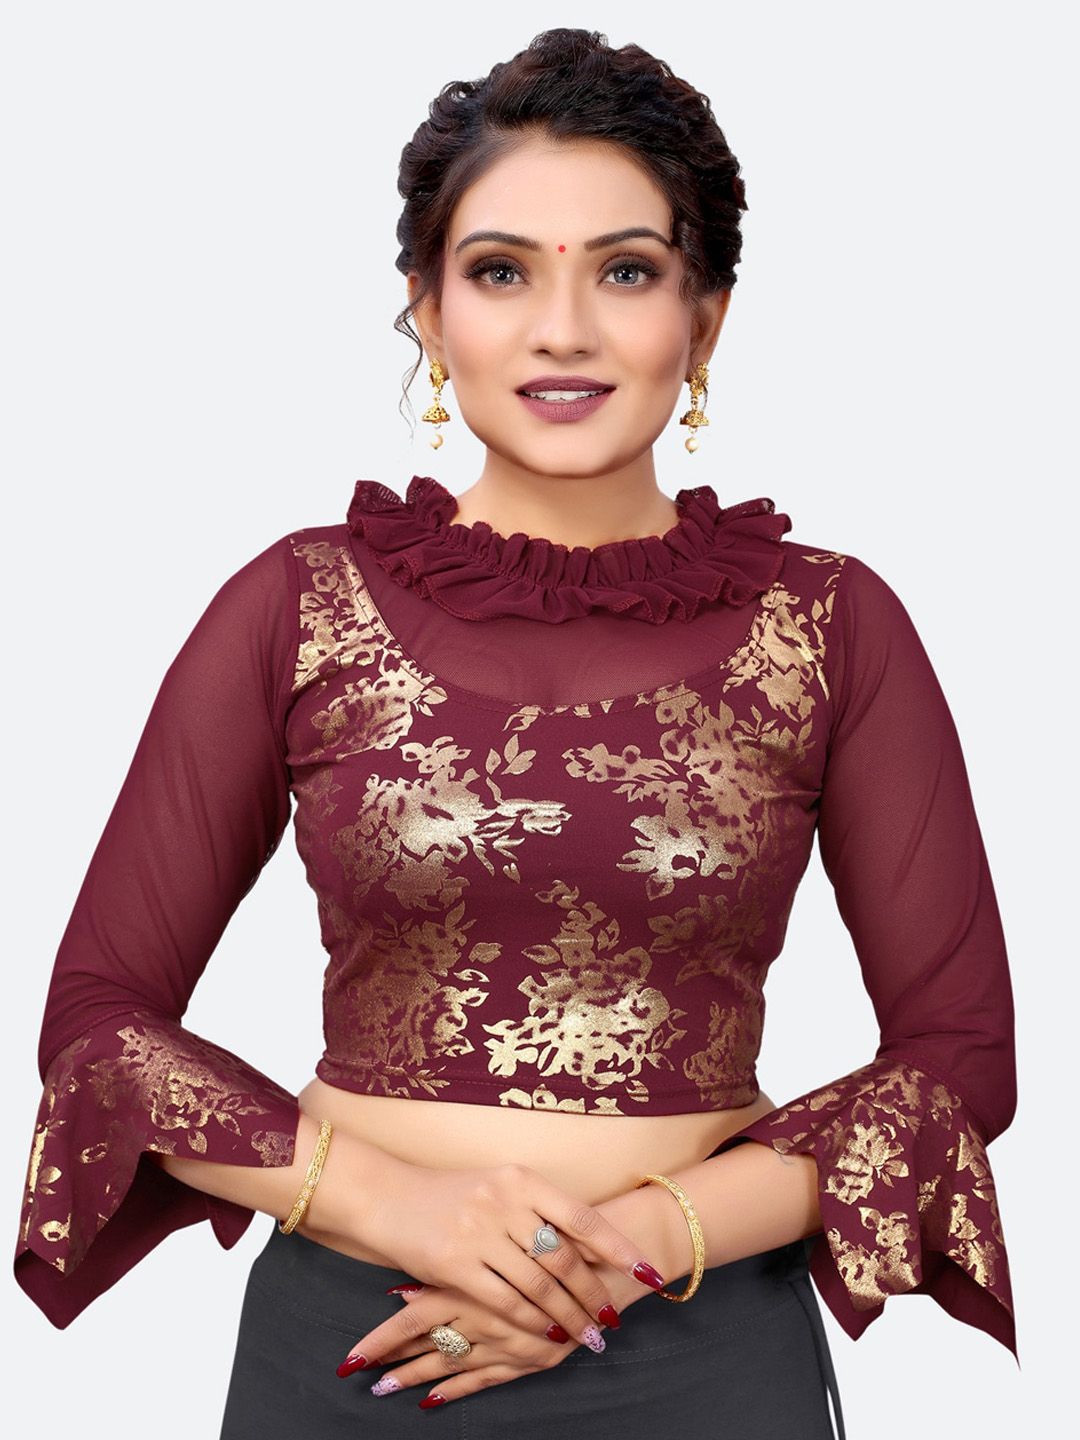 SIRIL Maroon & Golden Embellished Saree Blouse Price in India